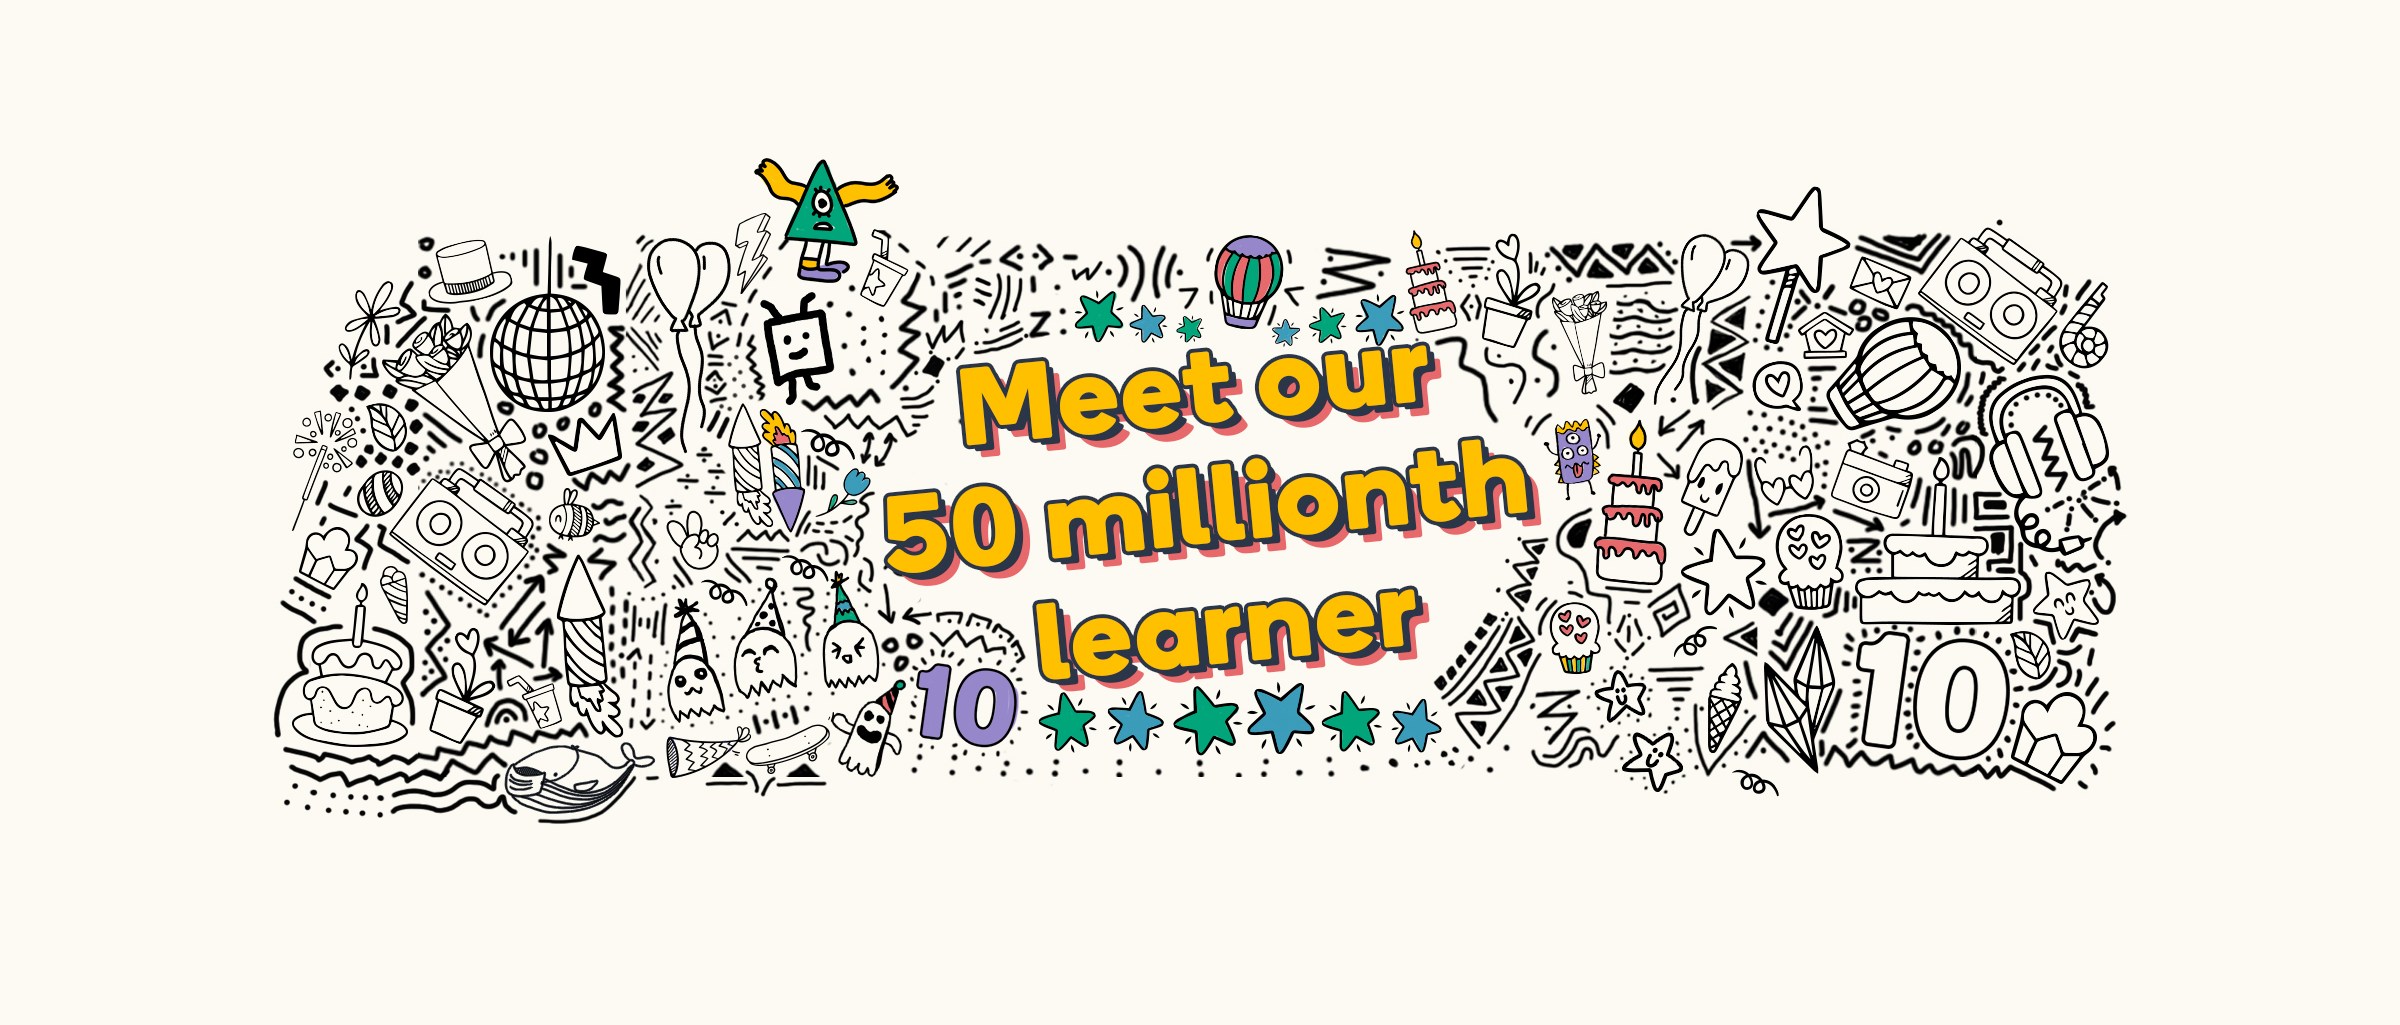 Meet our 50 millionth learner 🎉